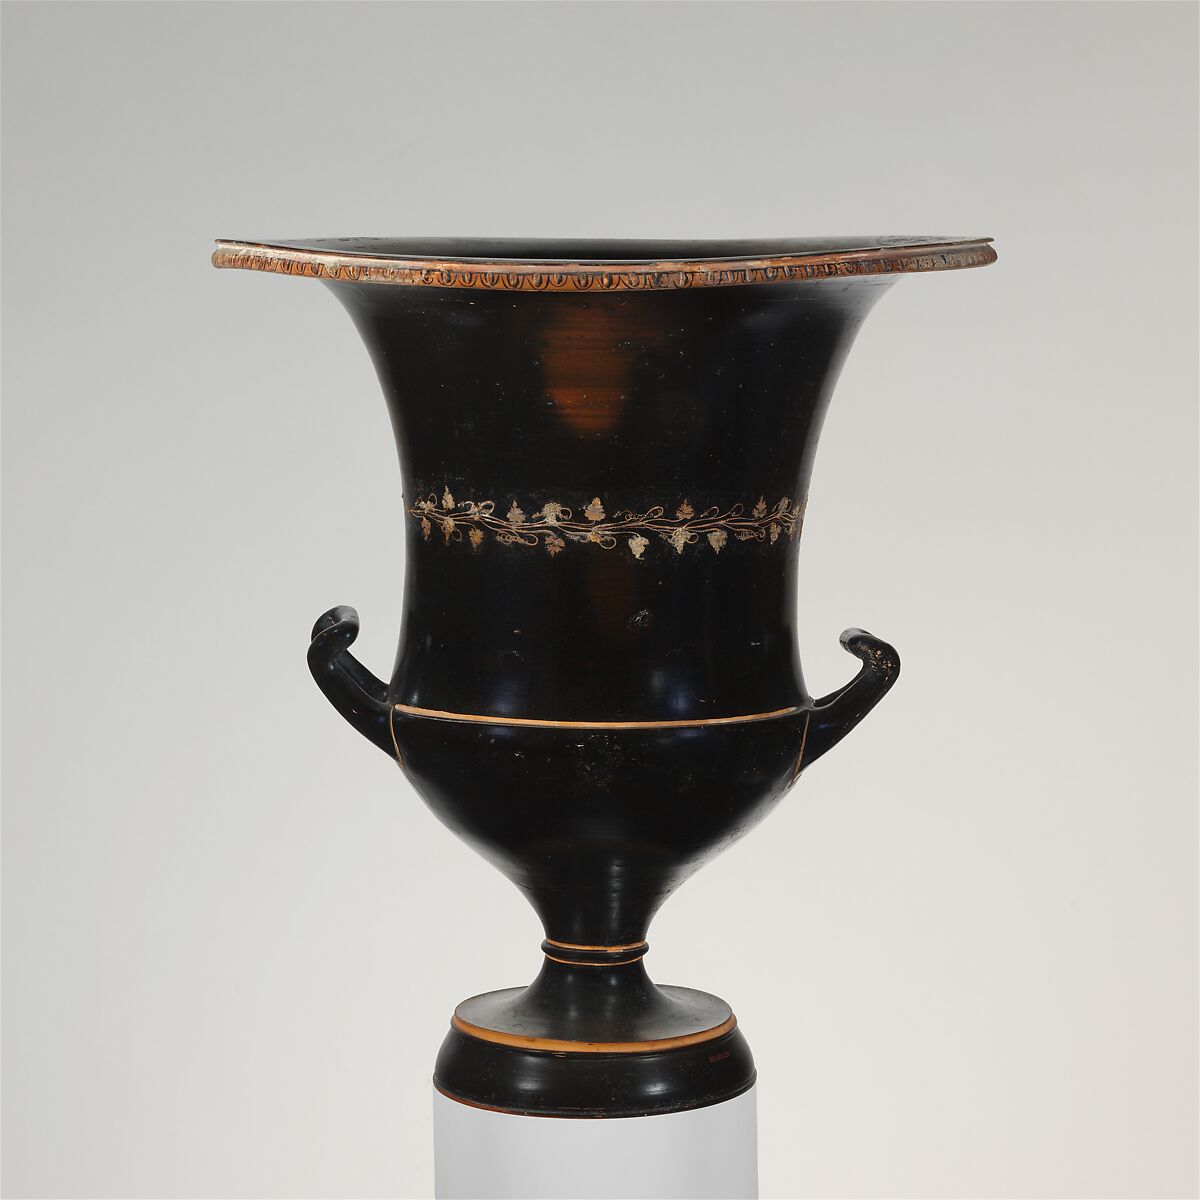 Terracotta calyx-krater (bowl for mixing wine and water), Terracotta, Greek, Attic 